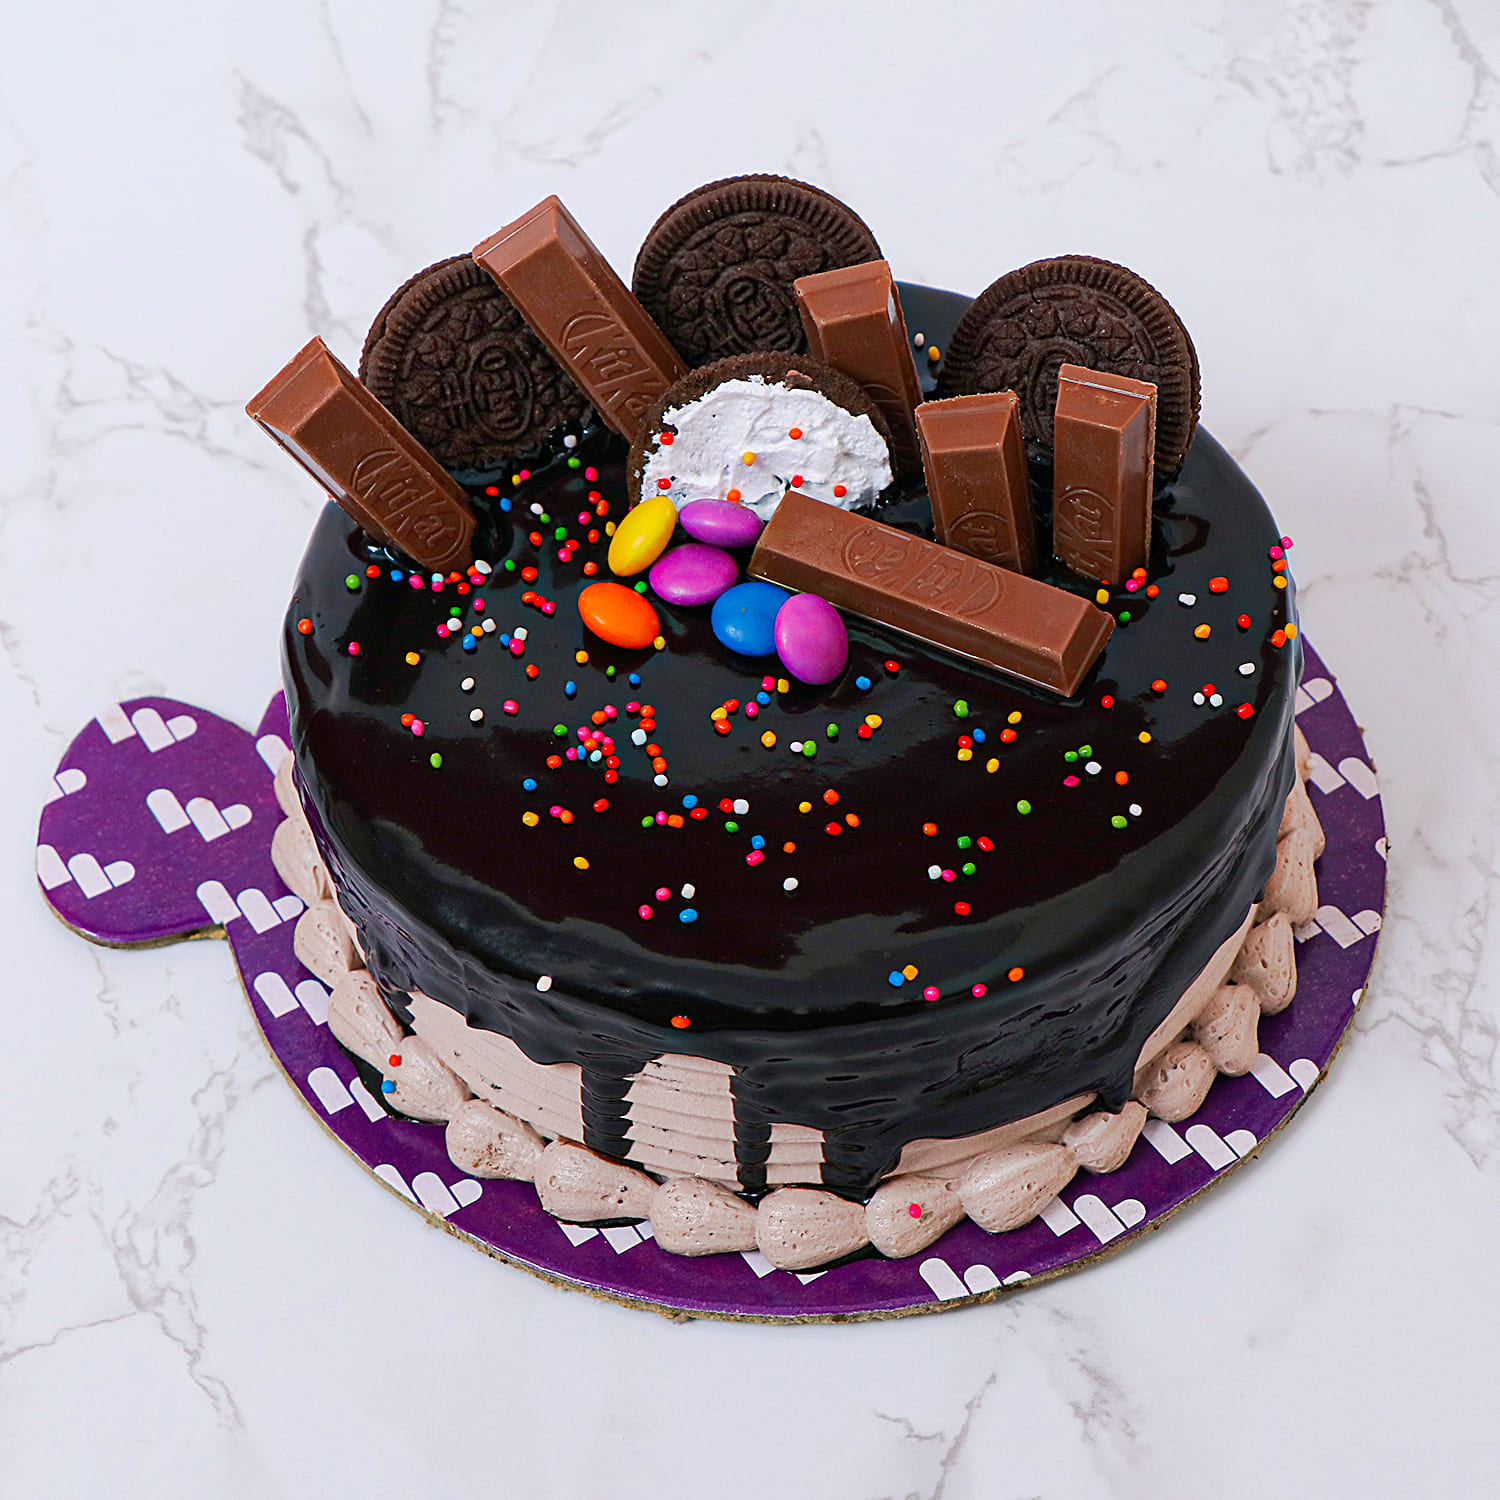 Online delicious heart shaped kitkat chocolate cake to Bangalore, Express  Delivery - redblooms